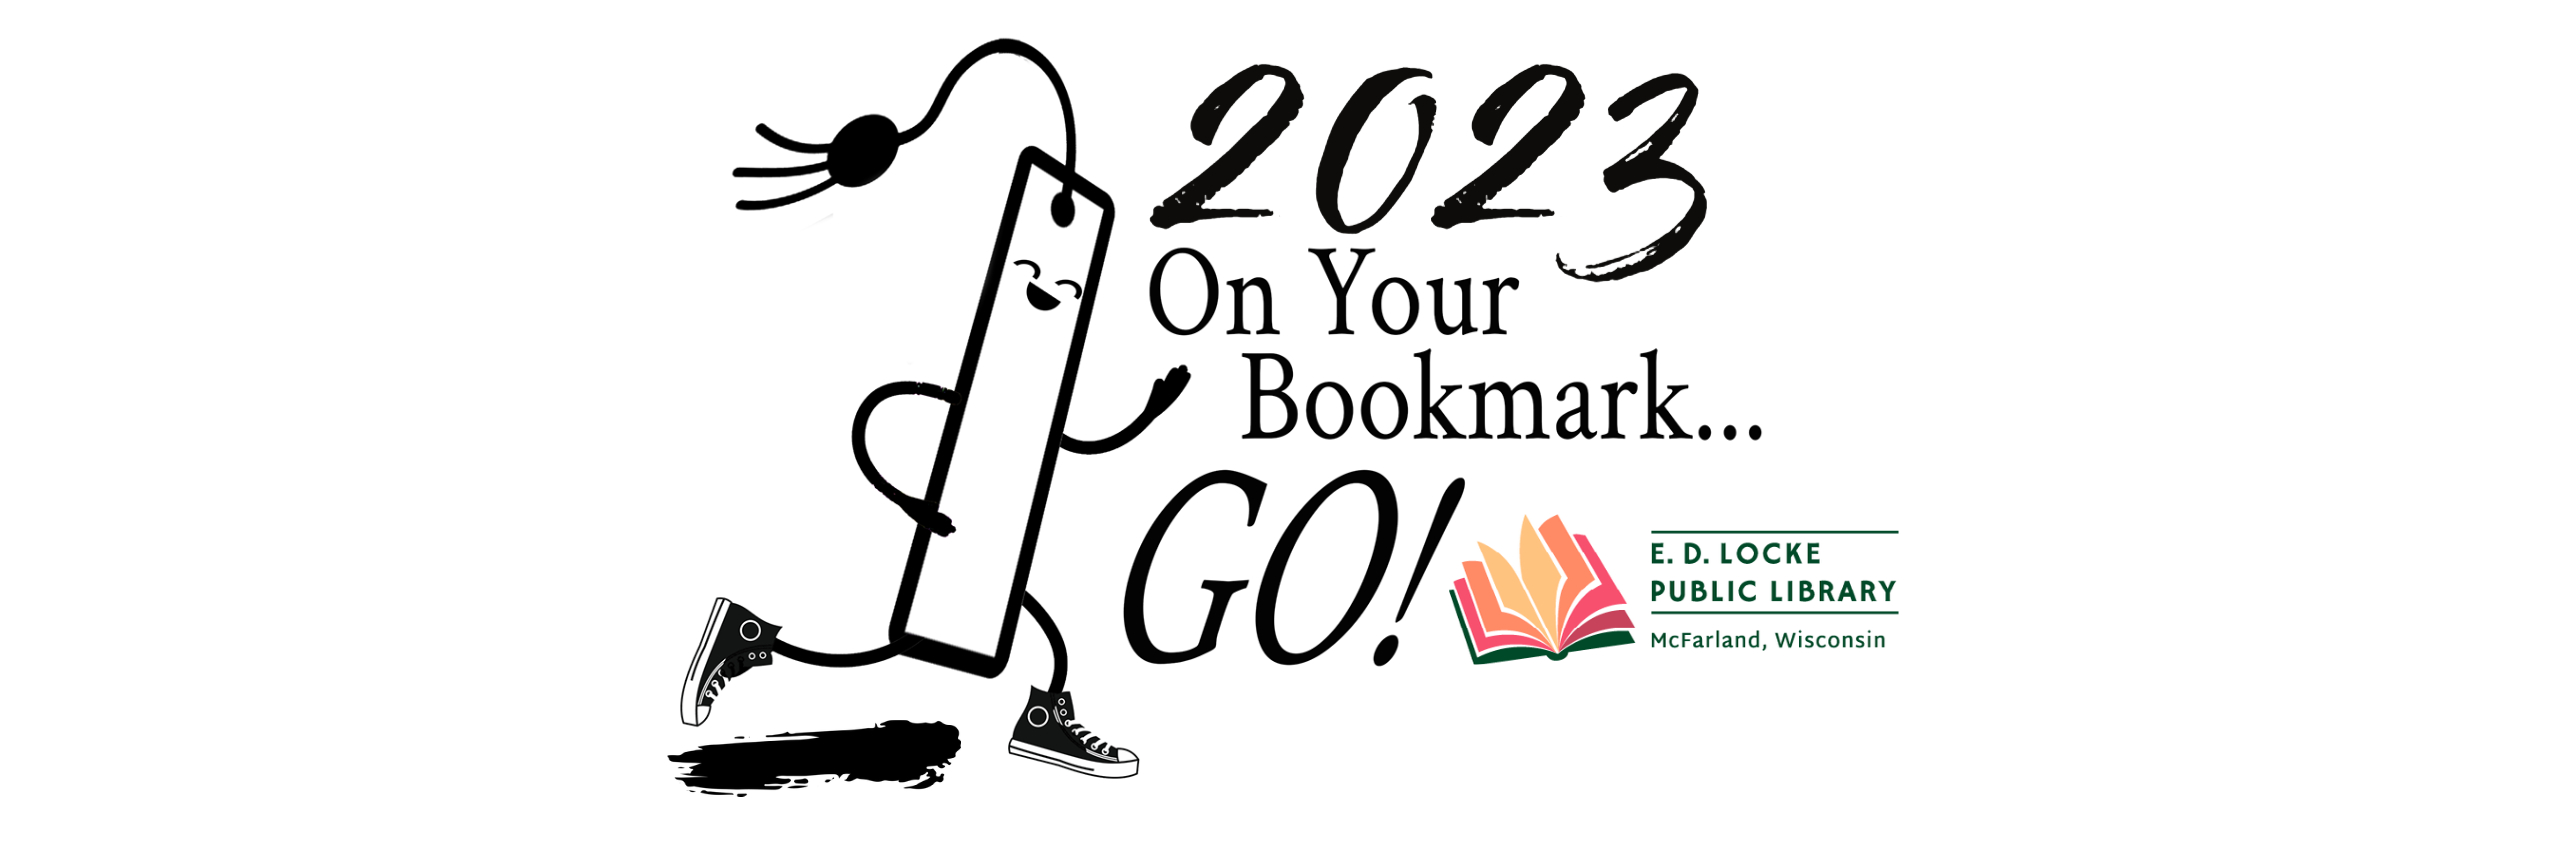 2023 On Your Bookmark Go Logo